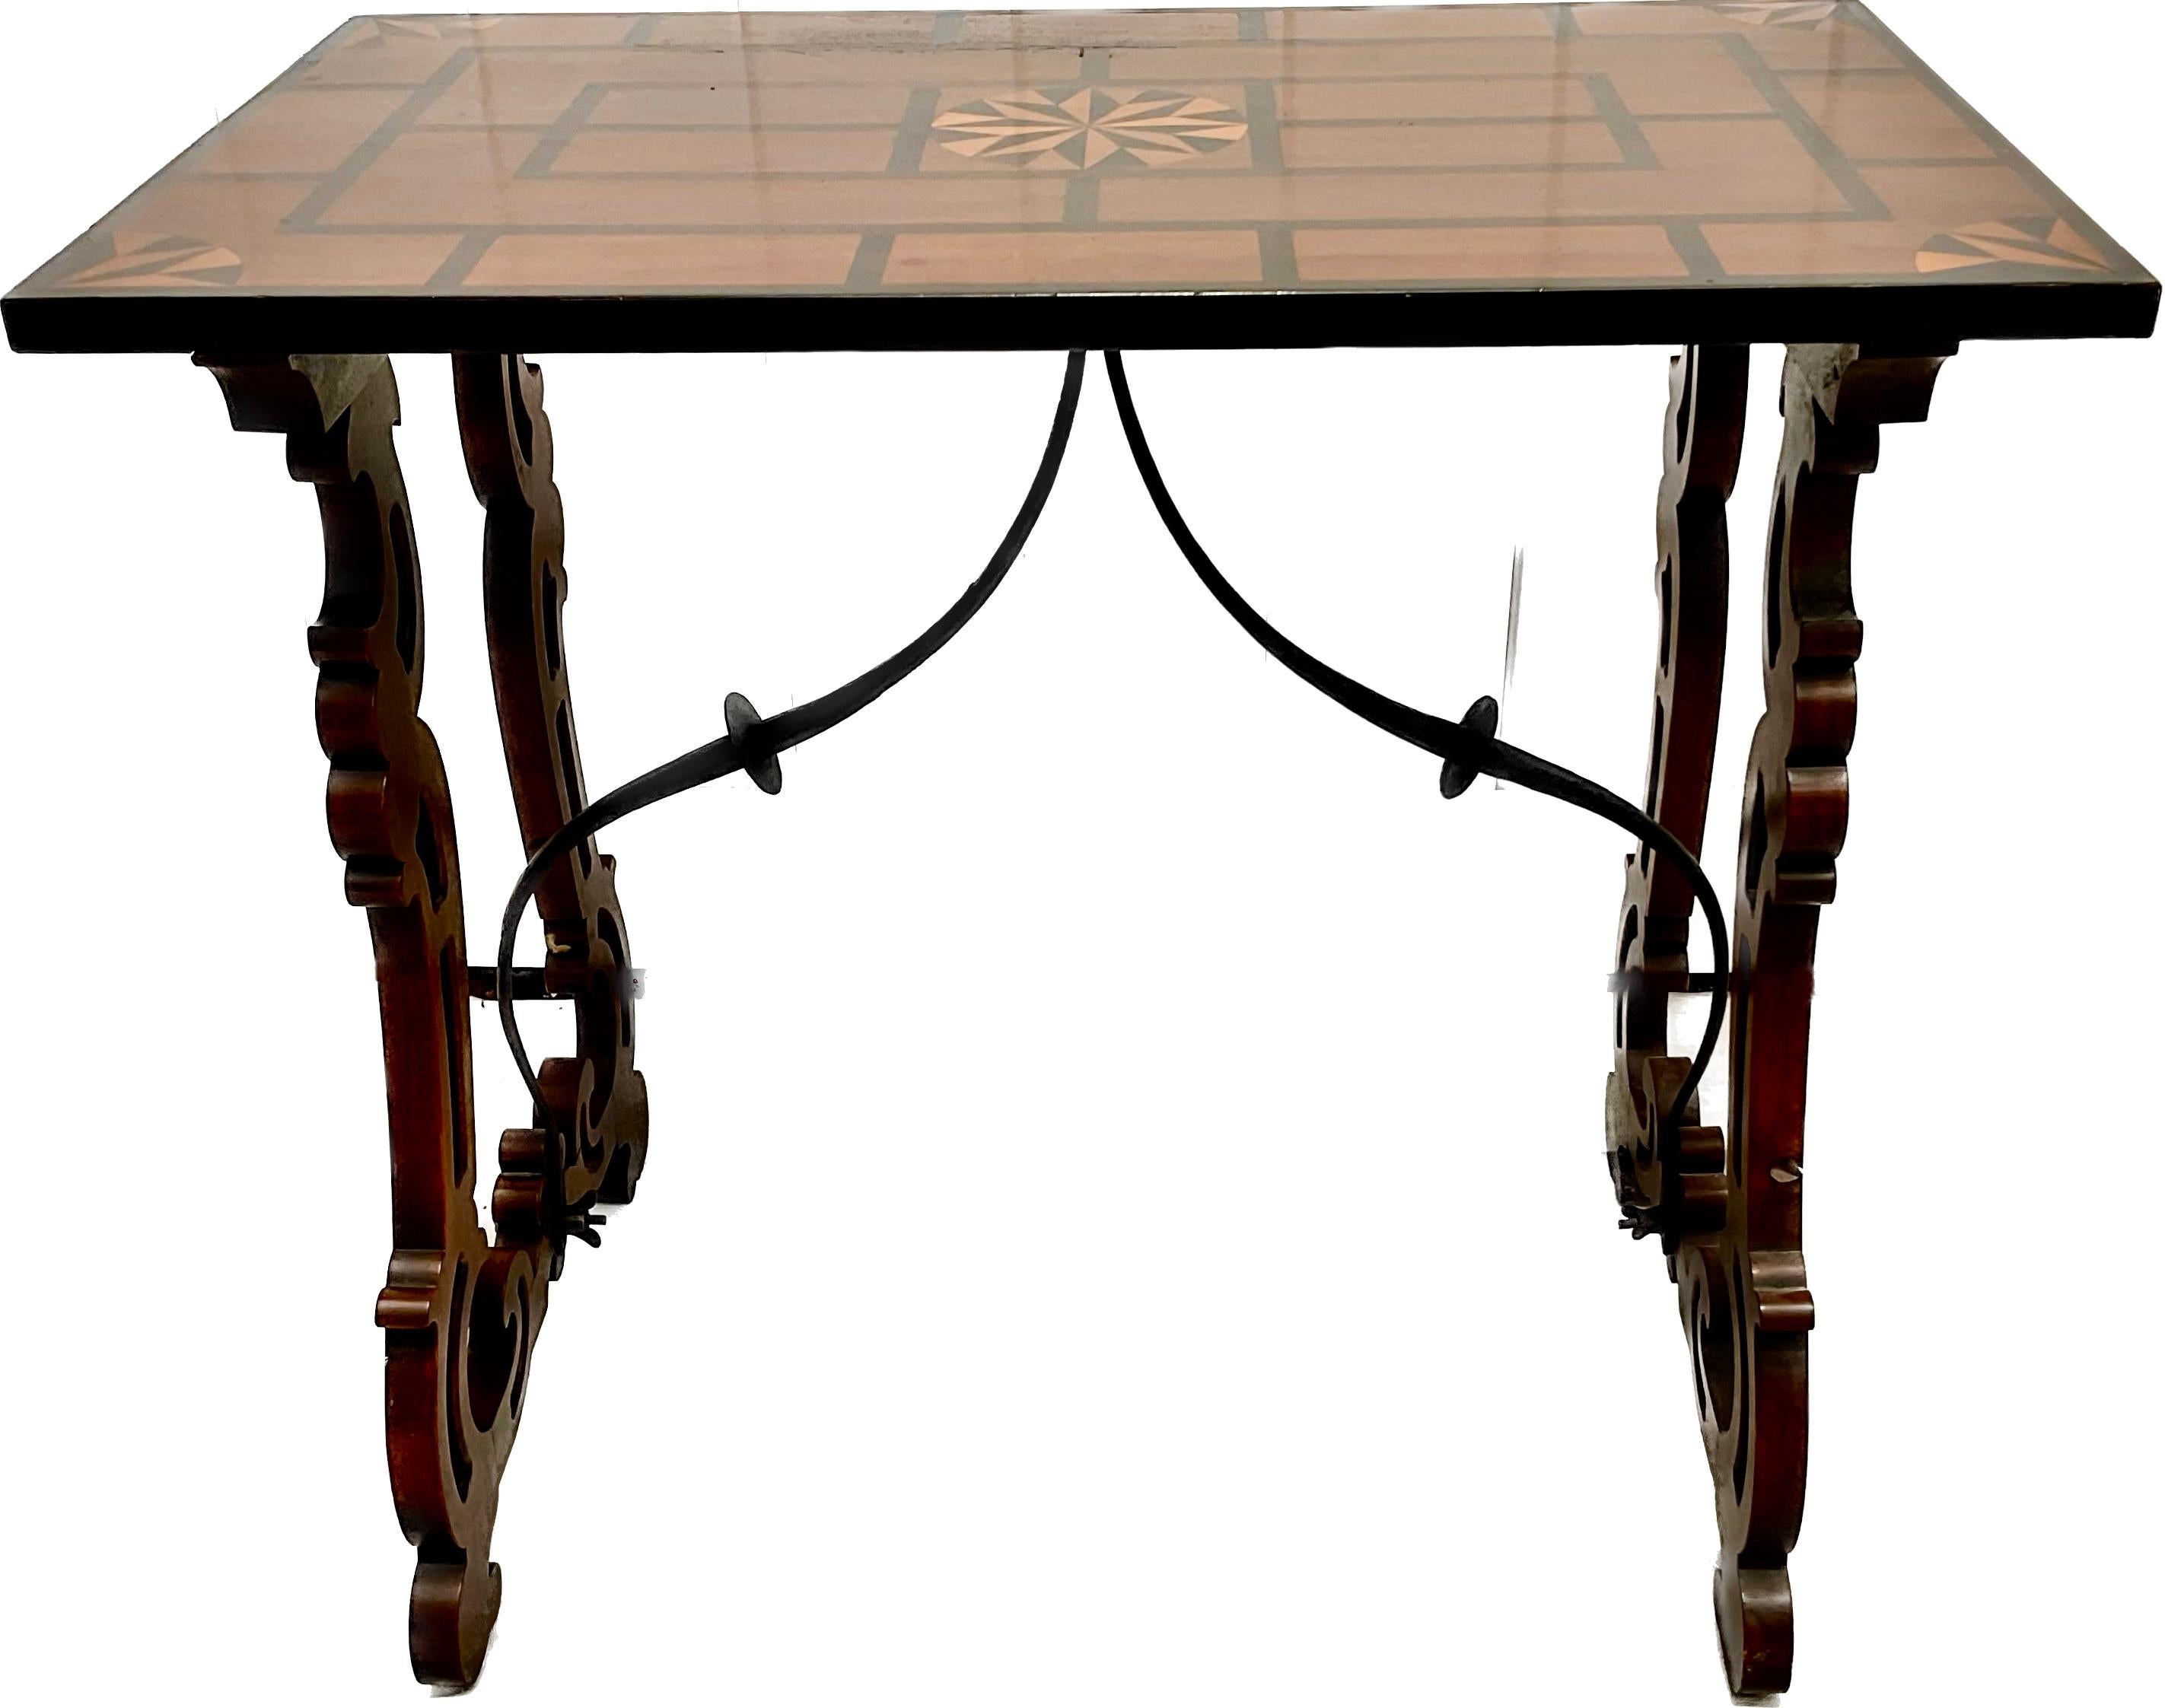 20th Century Spanish Baroque Inlaid Trestle Table For Sale